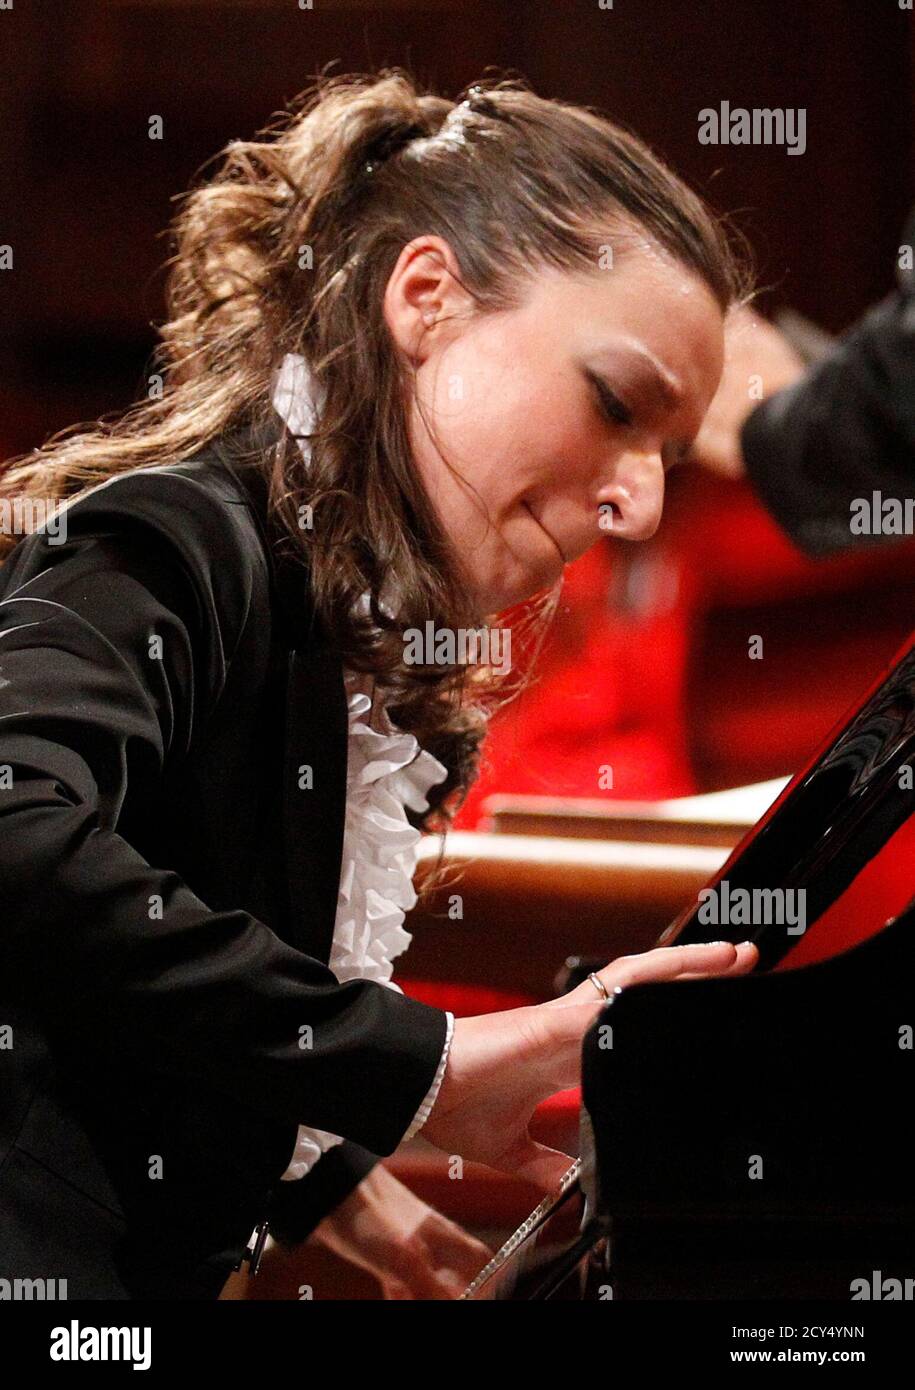 Winner Yulianna Avdeeva of Russia performs with The Symphonic Orchestra of  the National Philharmonic during auditions for the finals of the 16th  International Fryderyk Chopin Piano Competition in Warsaw October 19, 2010.